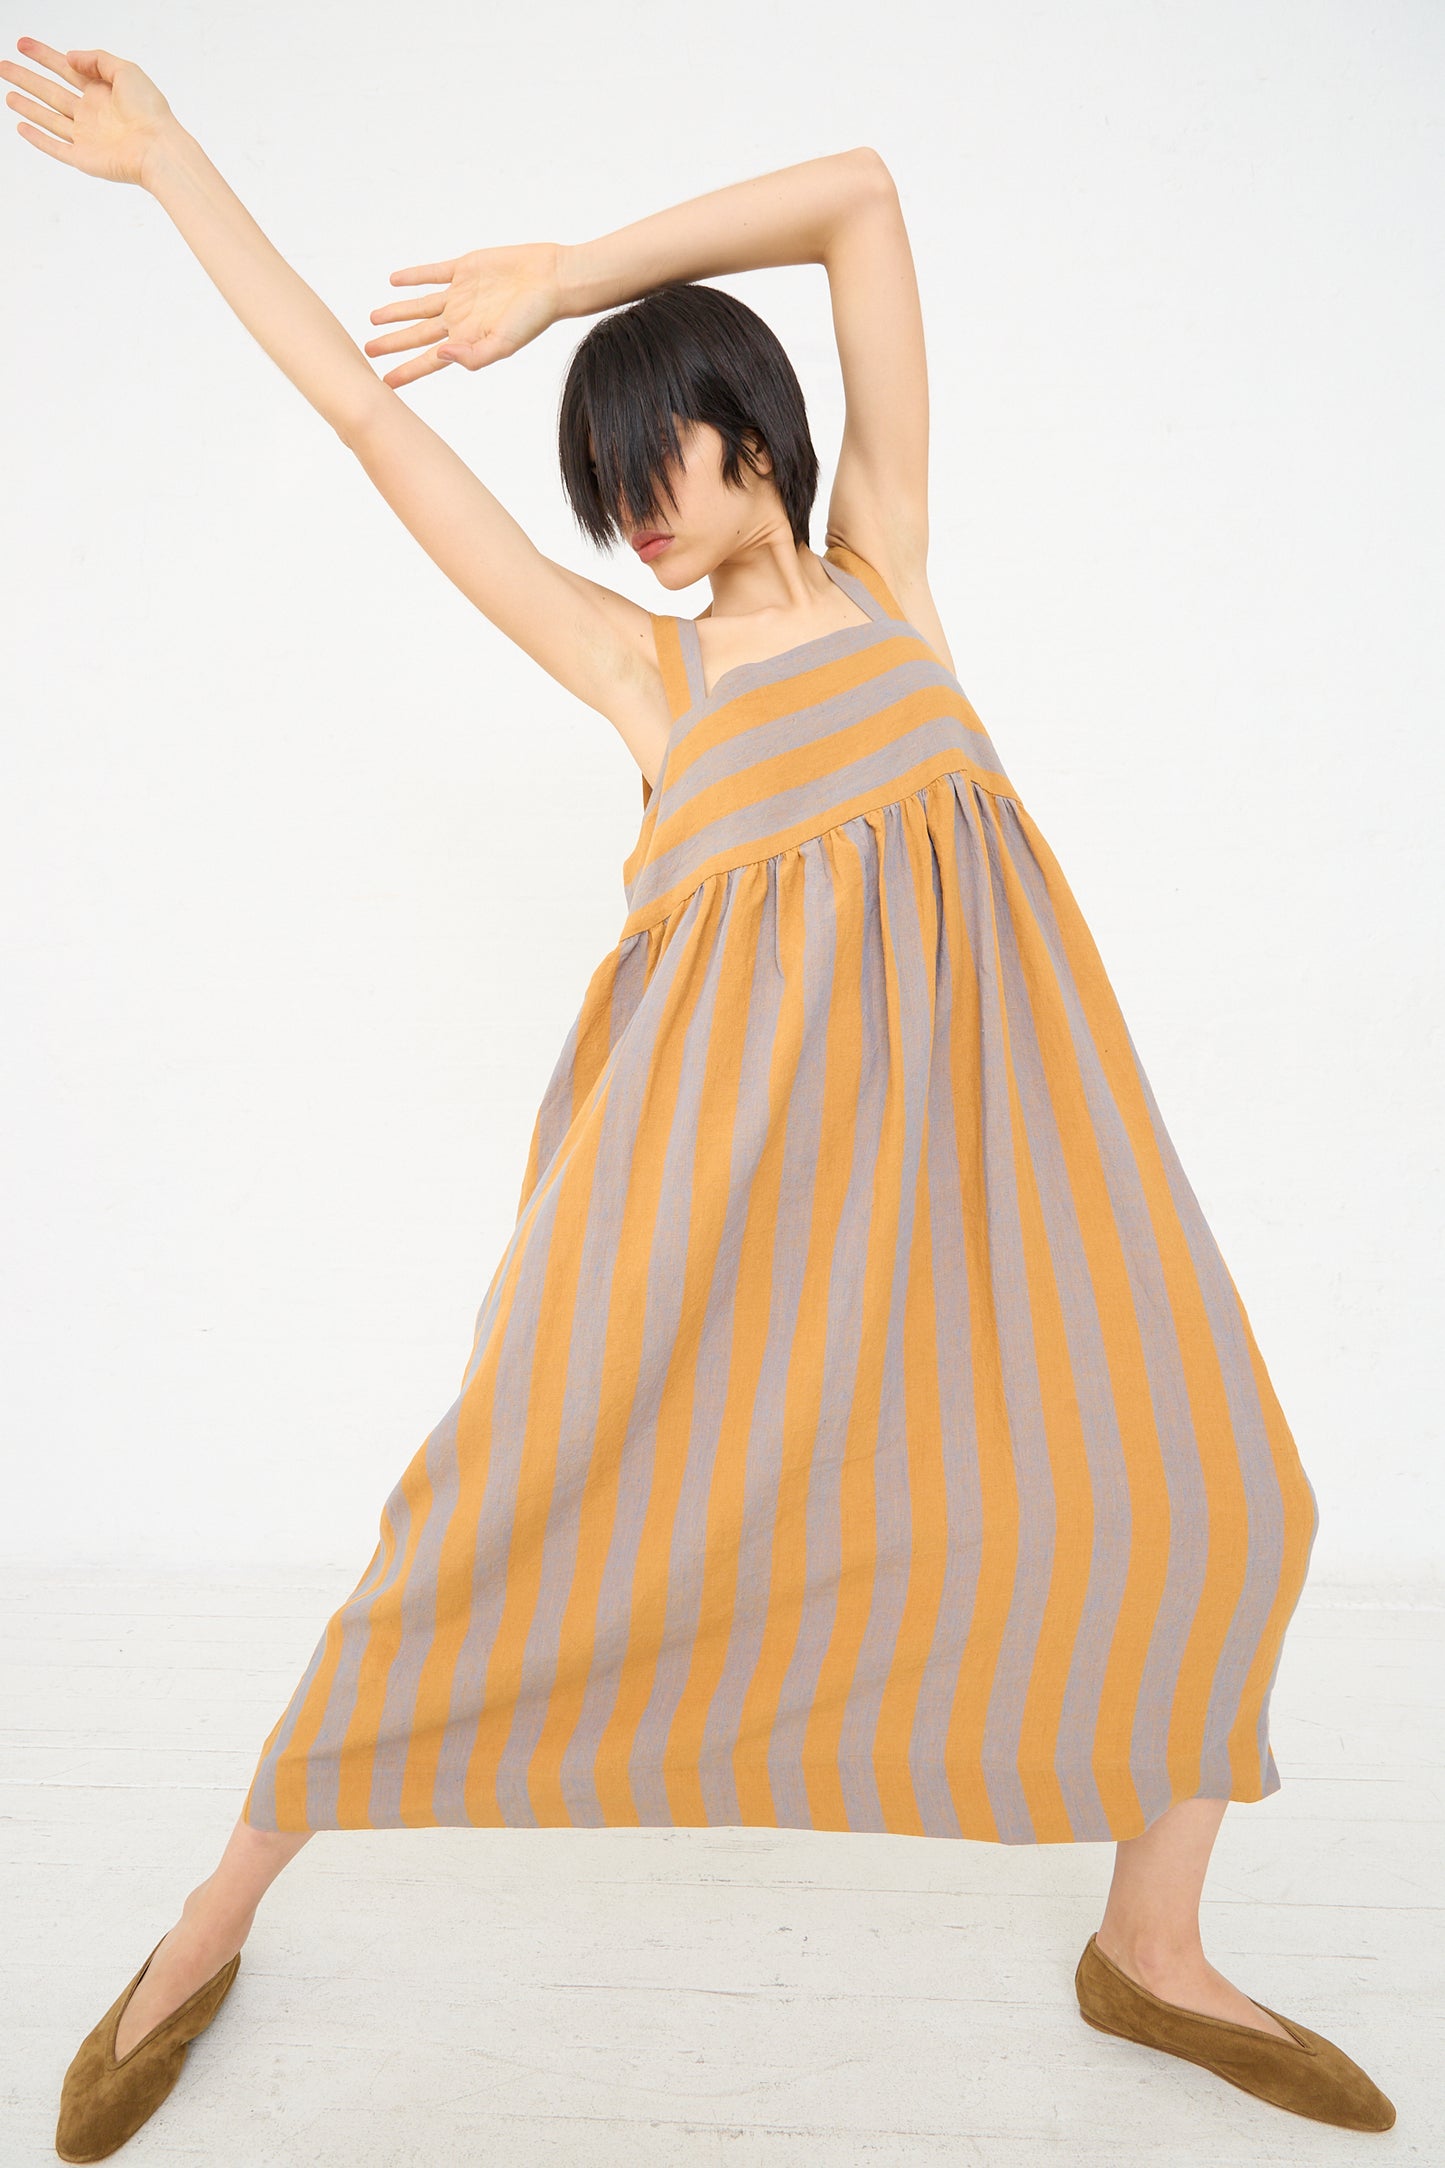 A woman in an oversized, striped Irish Linen Elba Dress in Bronze by Cawley is striking an expressive dance pose against a white background.